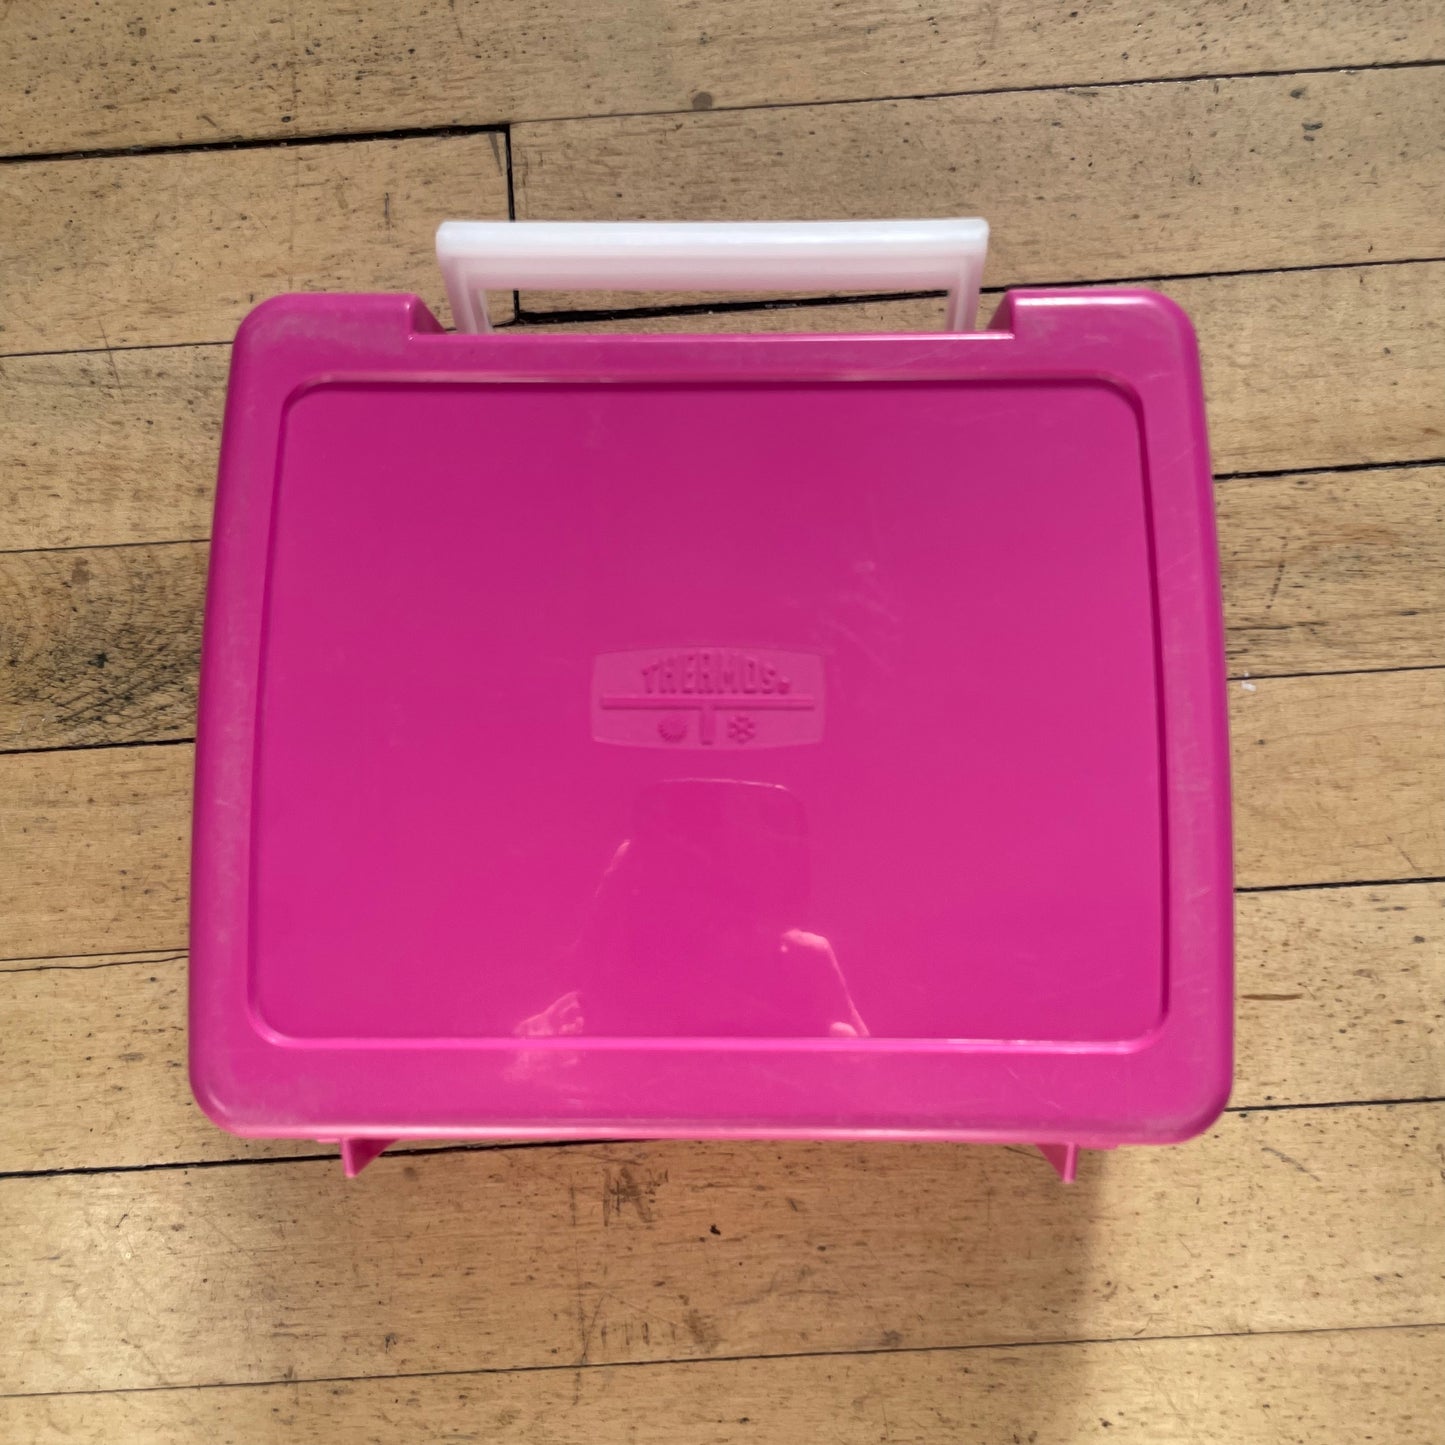 1988 Barbie Thermos Plastic Lunch Box